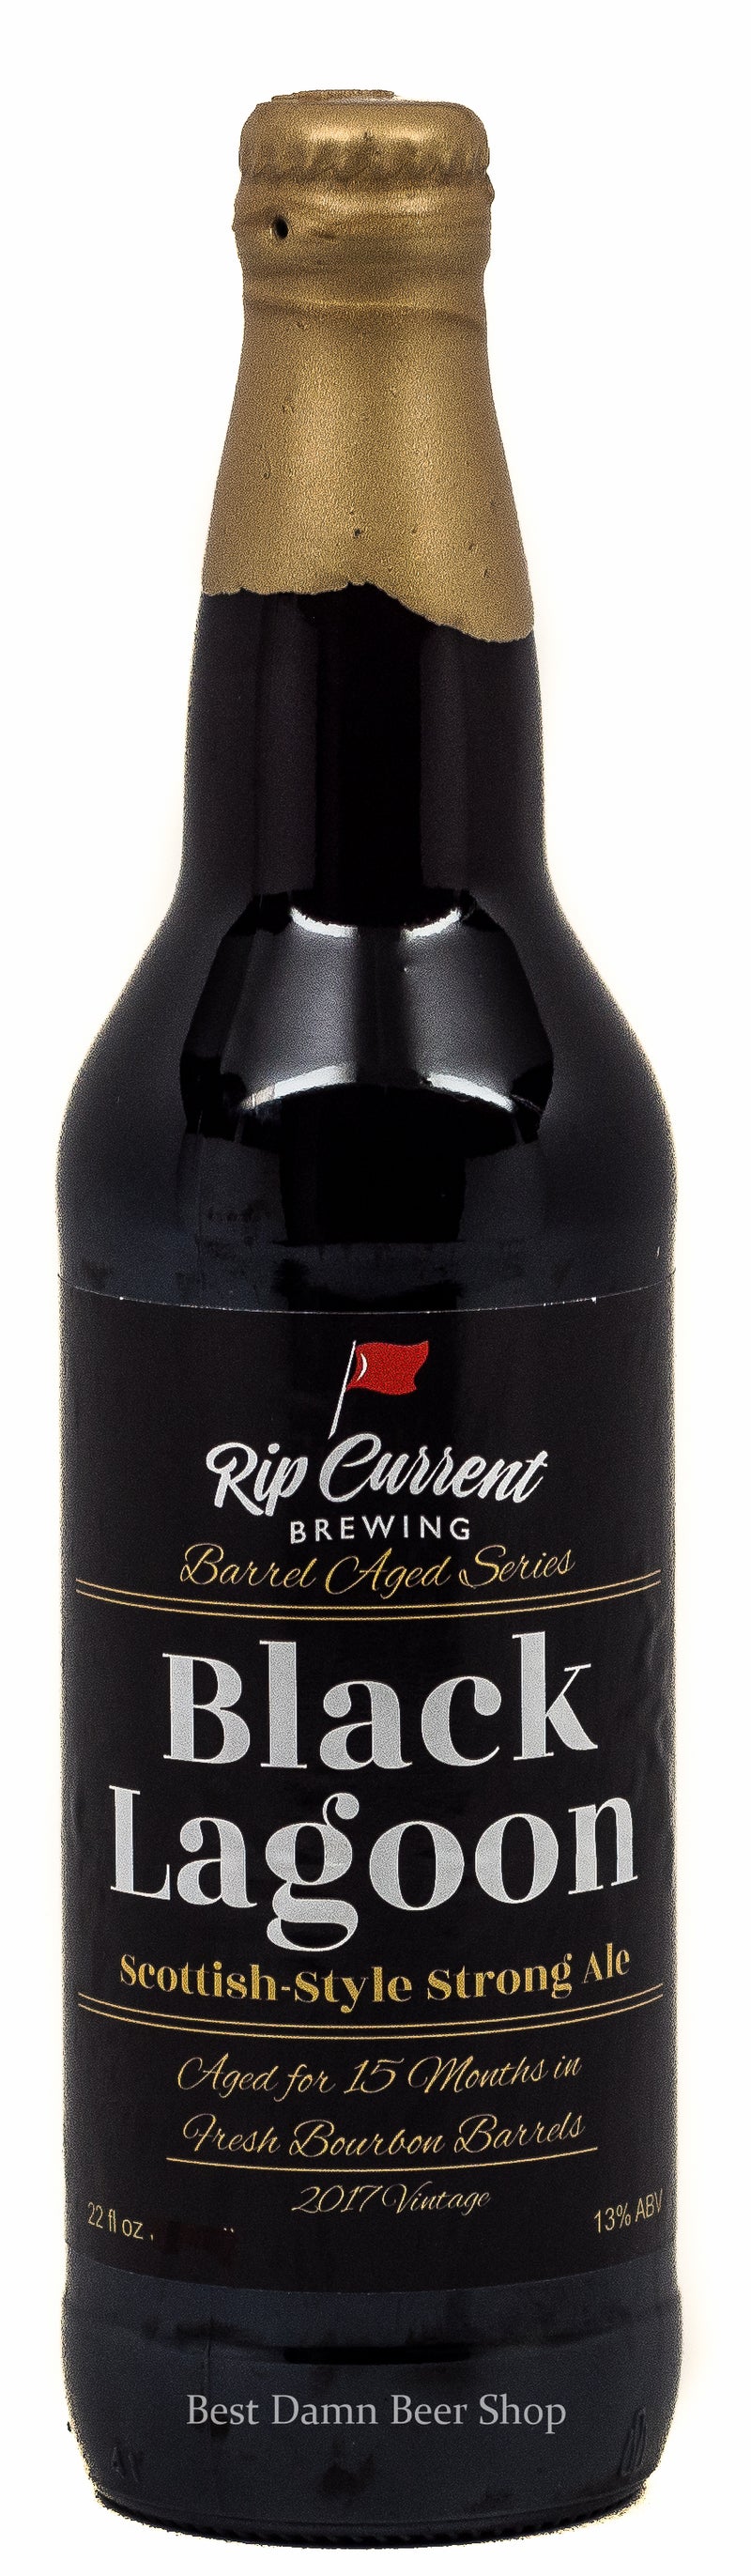 Rip Current Brewing Black Lagoon  Scottish-Style Strong Ale aged for 15 months in Fresh Bourbon Barrels